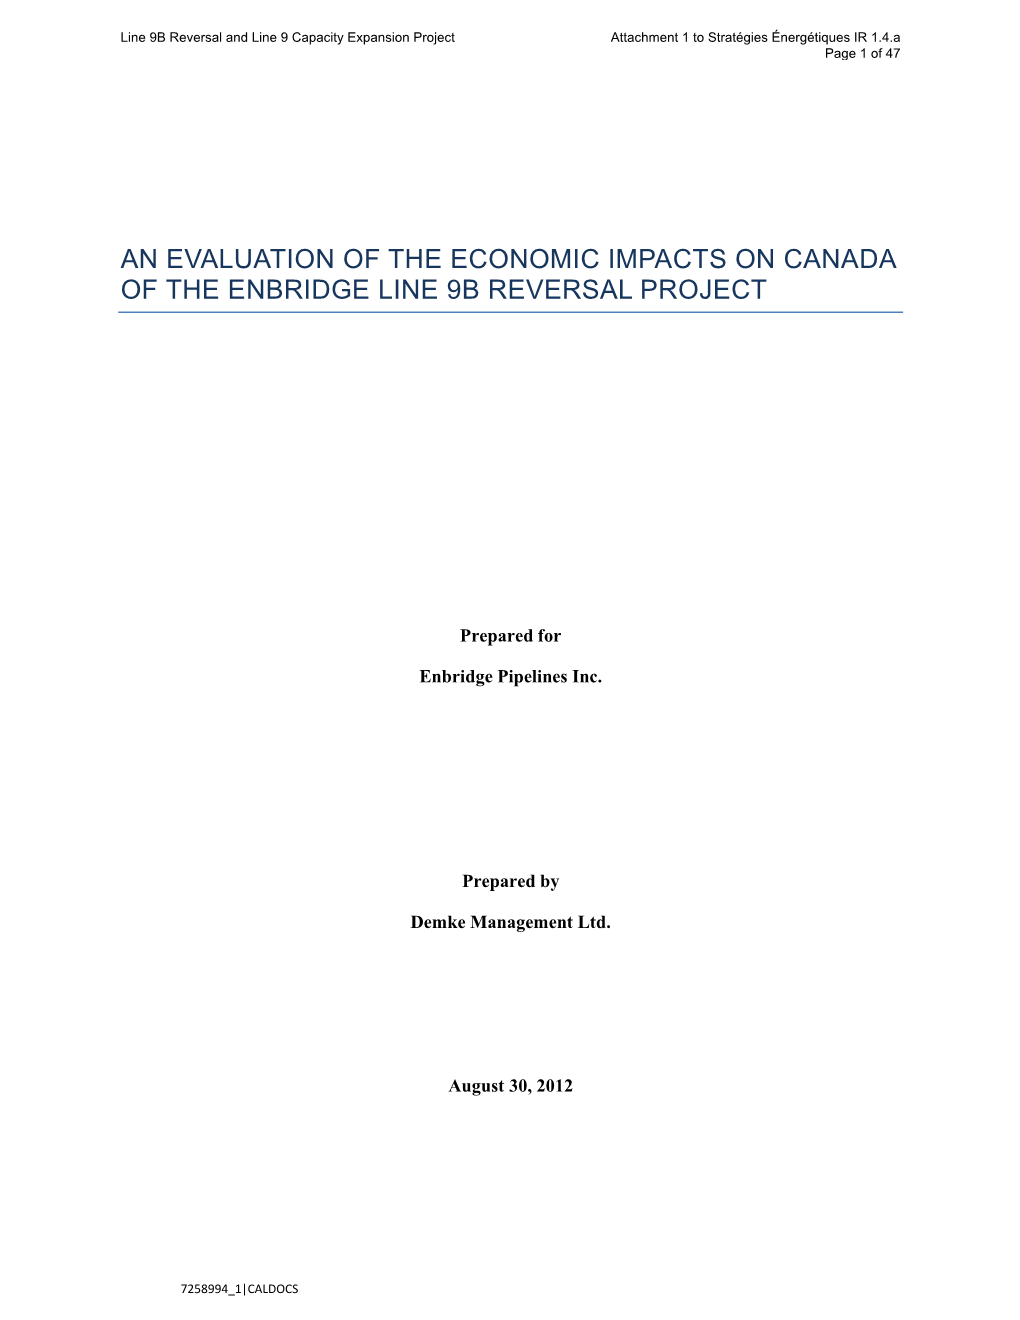 An Evaluation of the Economic Impacts on Canada of the Enbridge Line 9B Reversal Project